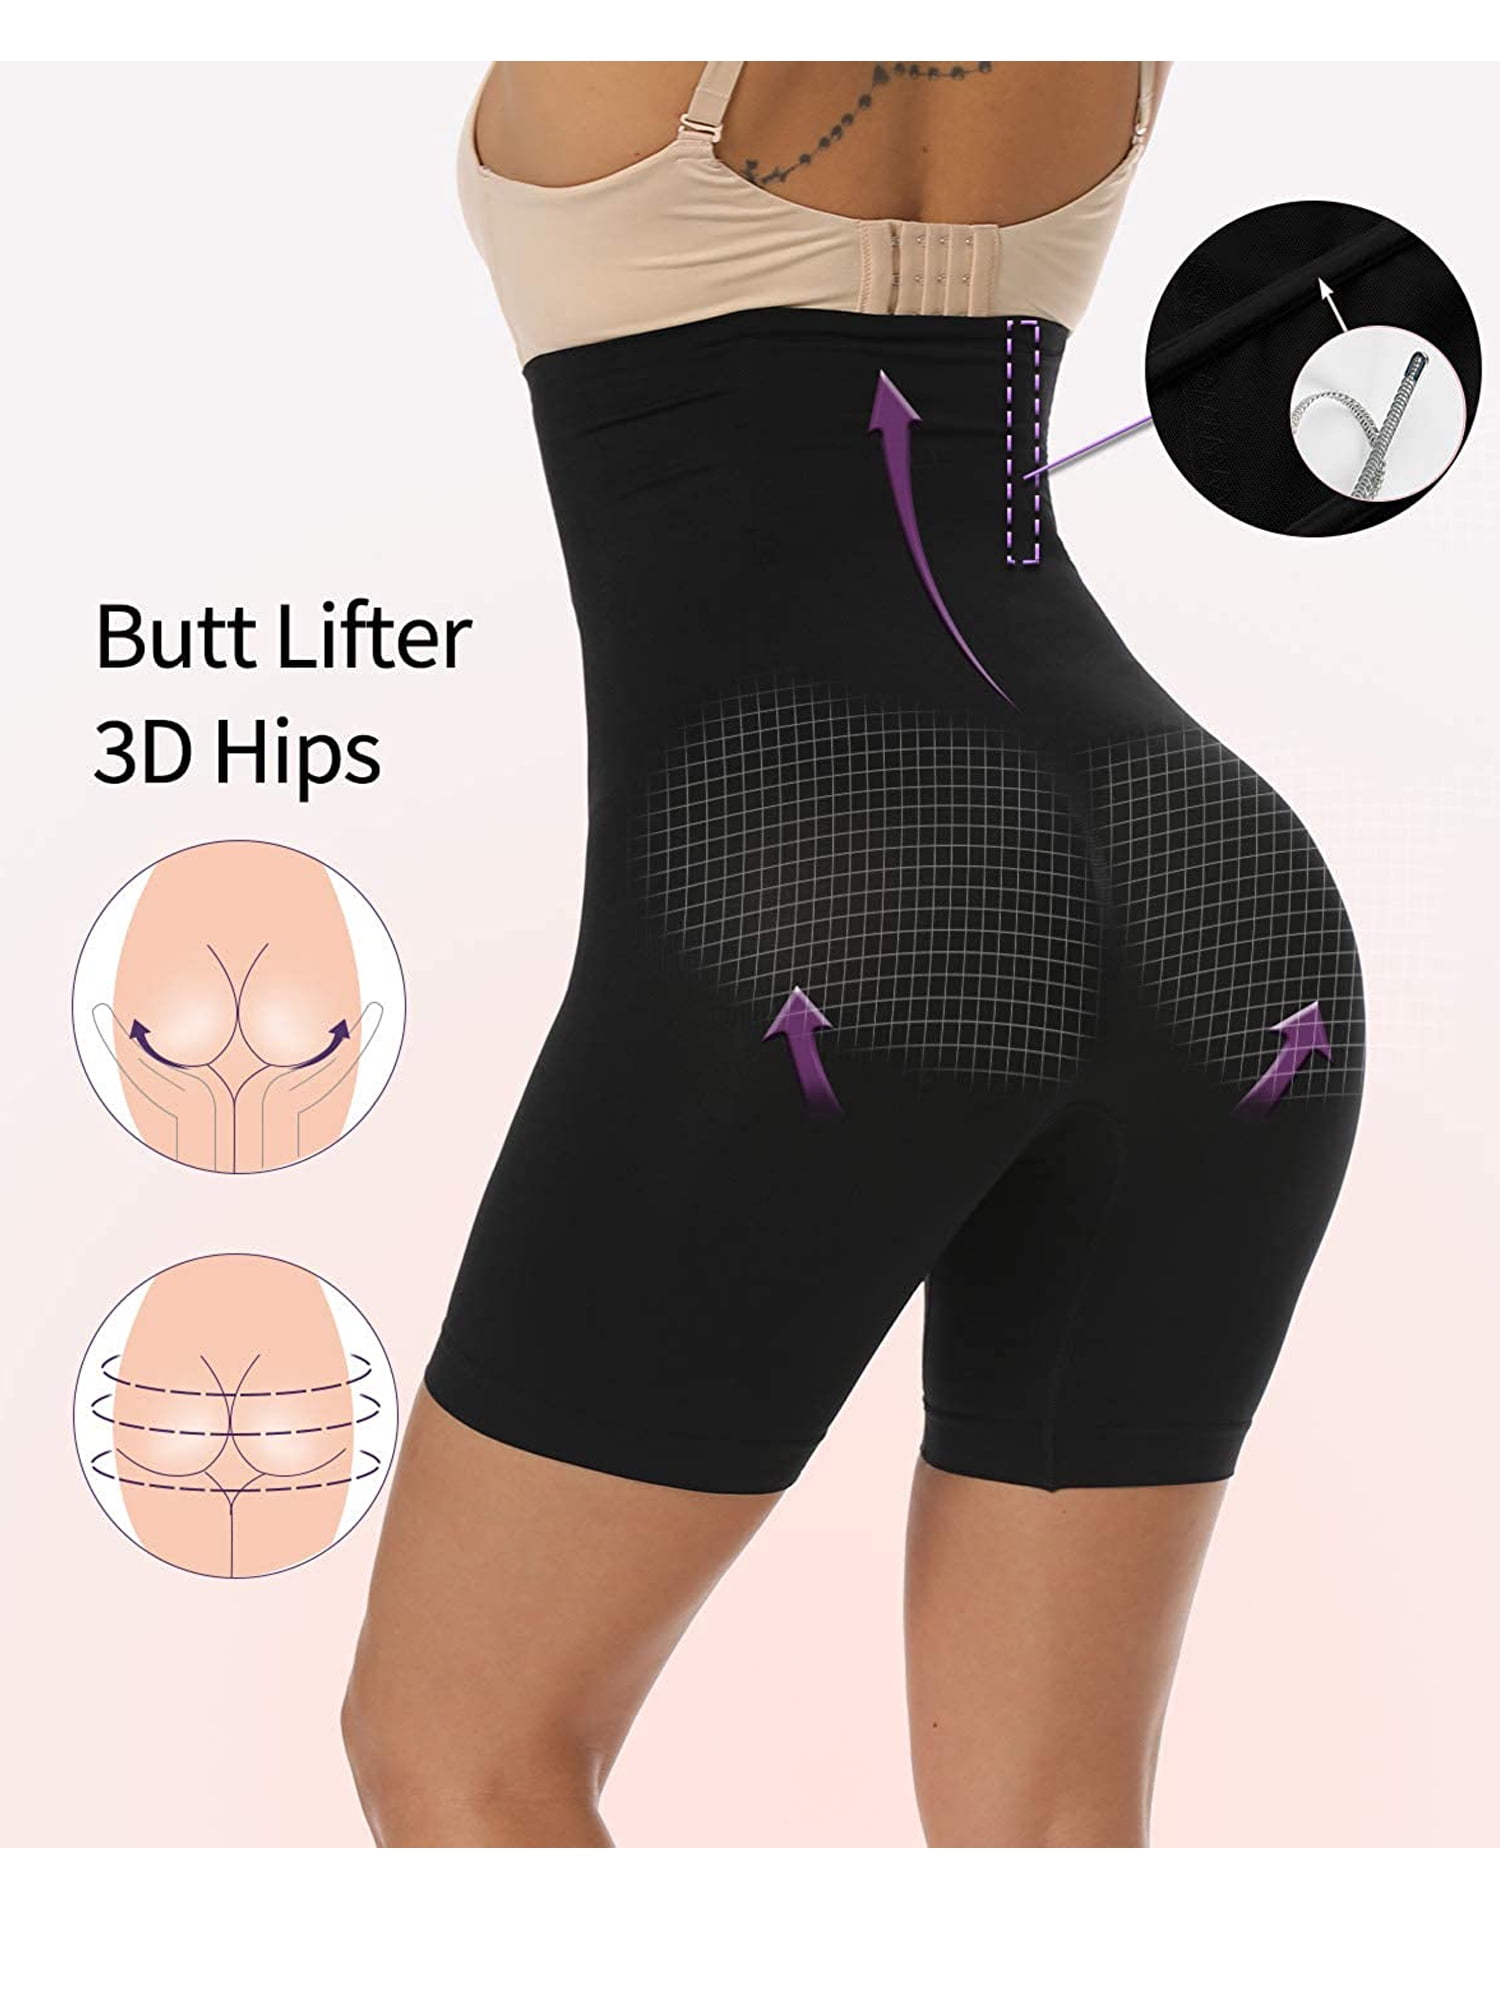 SURE YOU LIKE High Waist Trainer Shapewear Short Adjustable Firm Tummy  Control Body Shaper Thigh Slimmer Gym Shorts For Women - ShopStyle